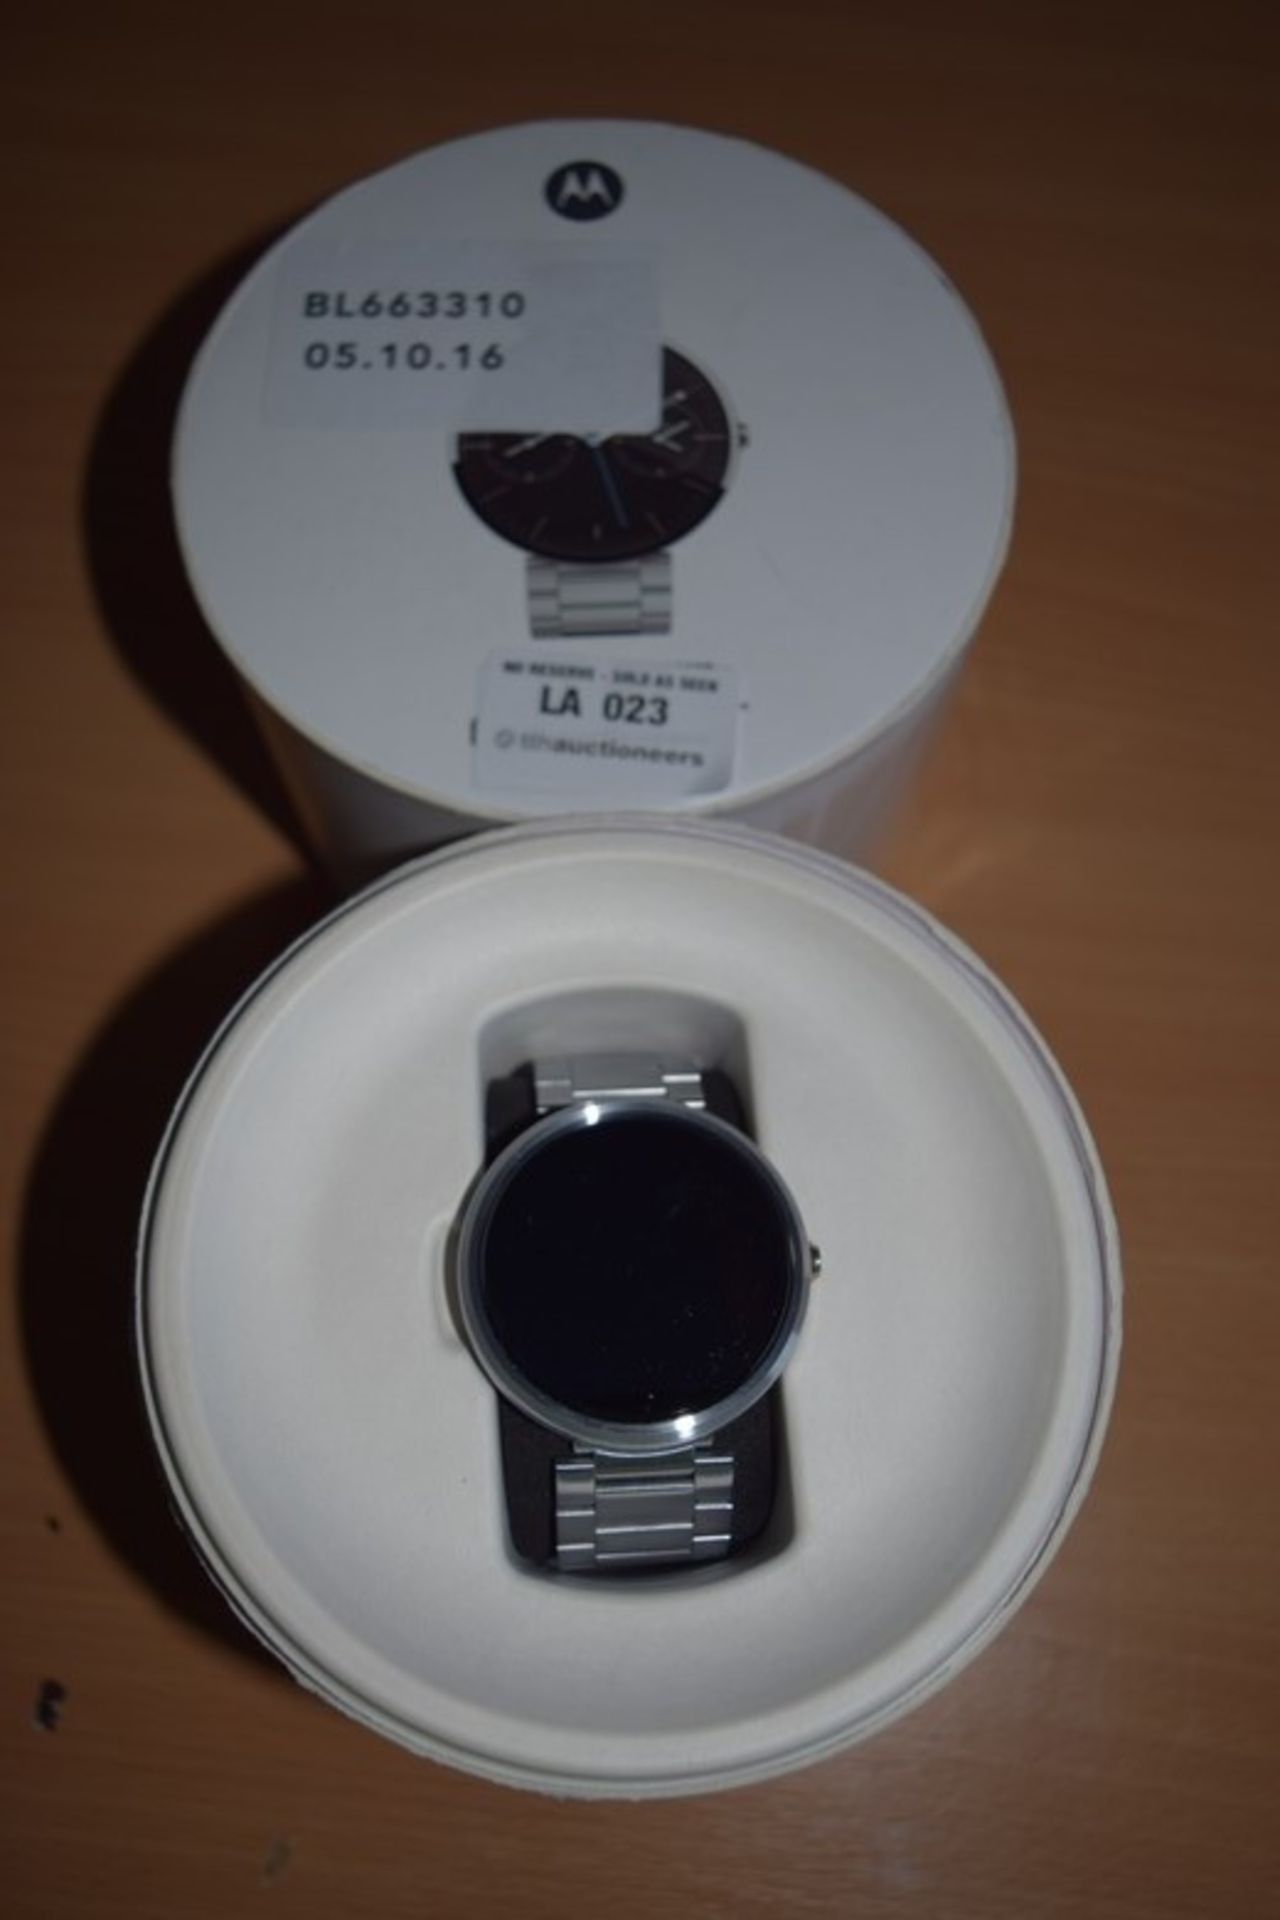 1 x MOTO 360 SMART WATCH RRP £180 (05.10.2016) *PLEASE NOTE THAT THE BID PRICE IS MULTIPLIED BY